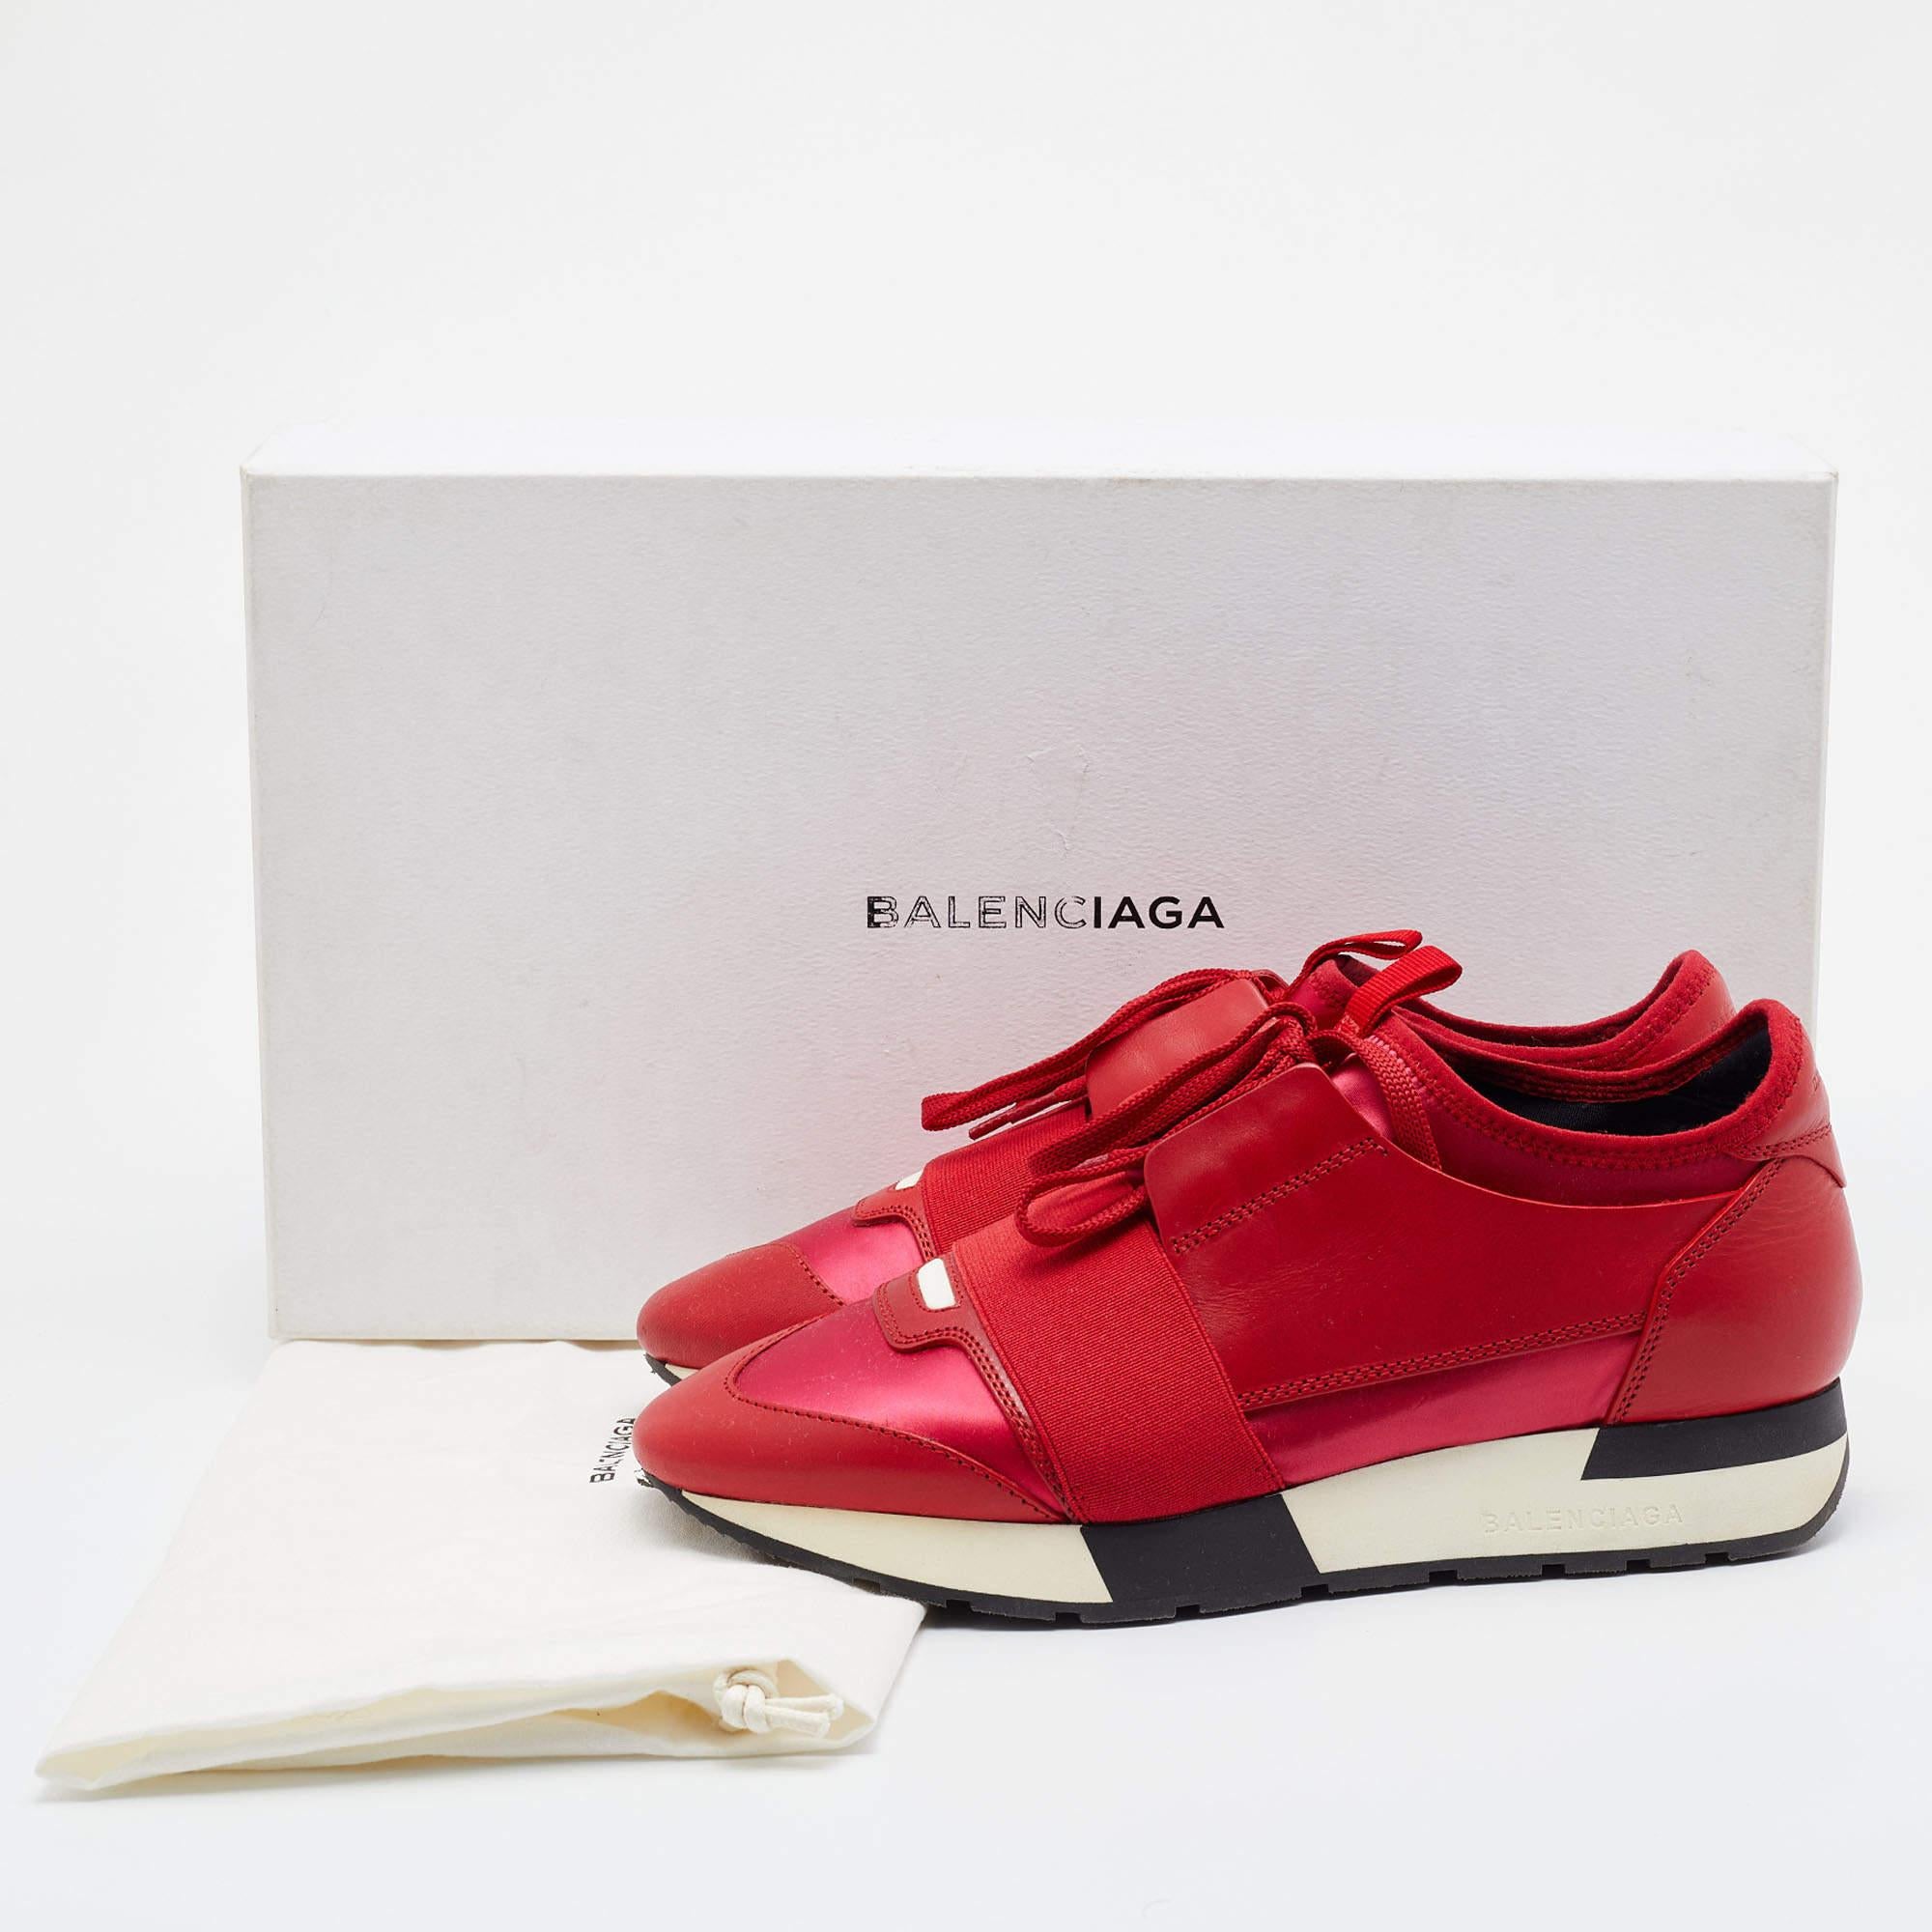 Balenciaga Red Leather and Neoprene Race Runner Low Top Sneakers Size 37 2